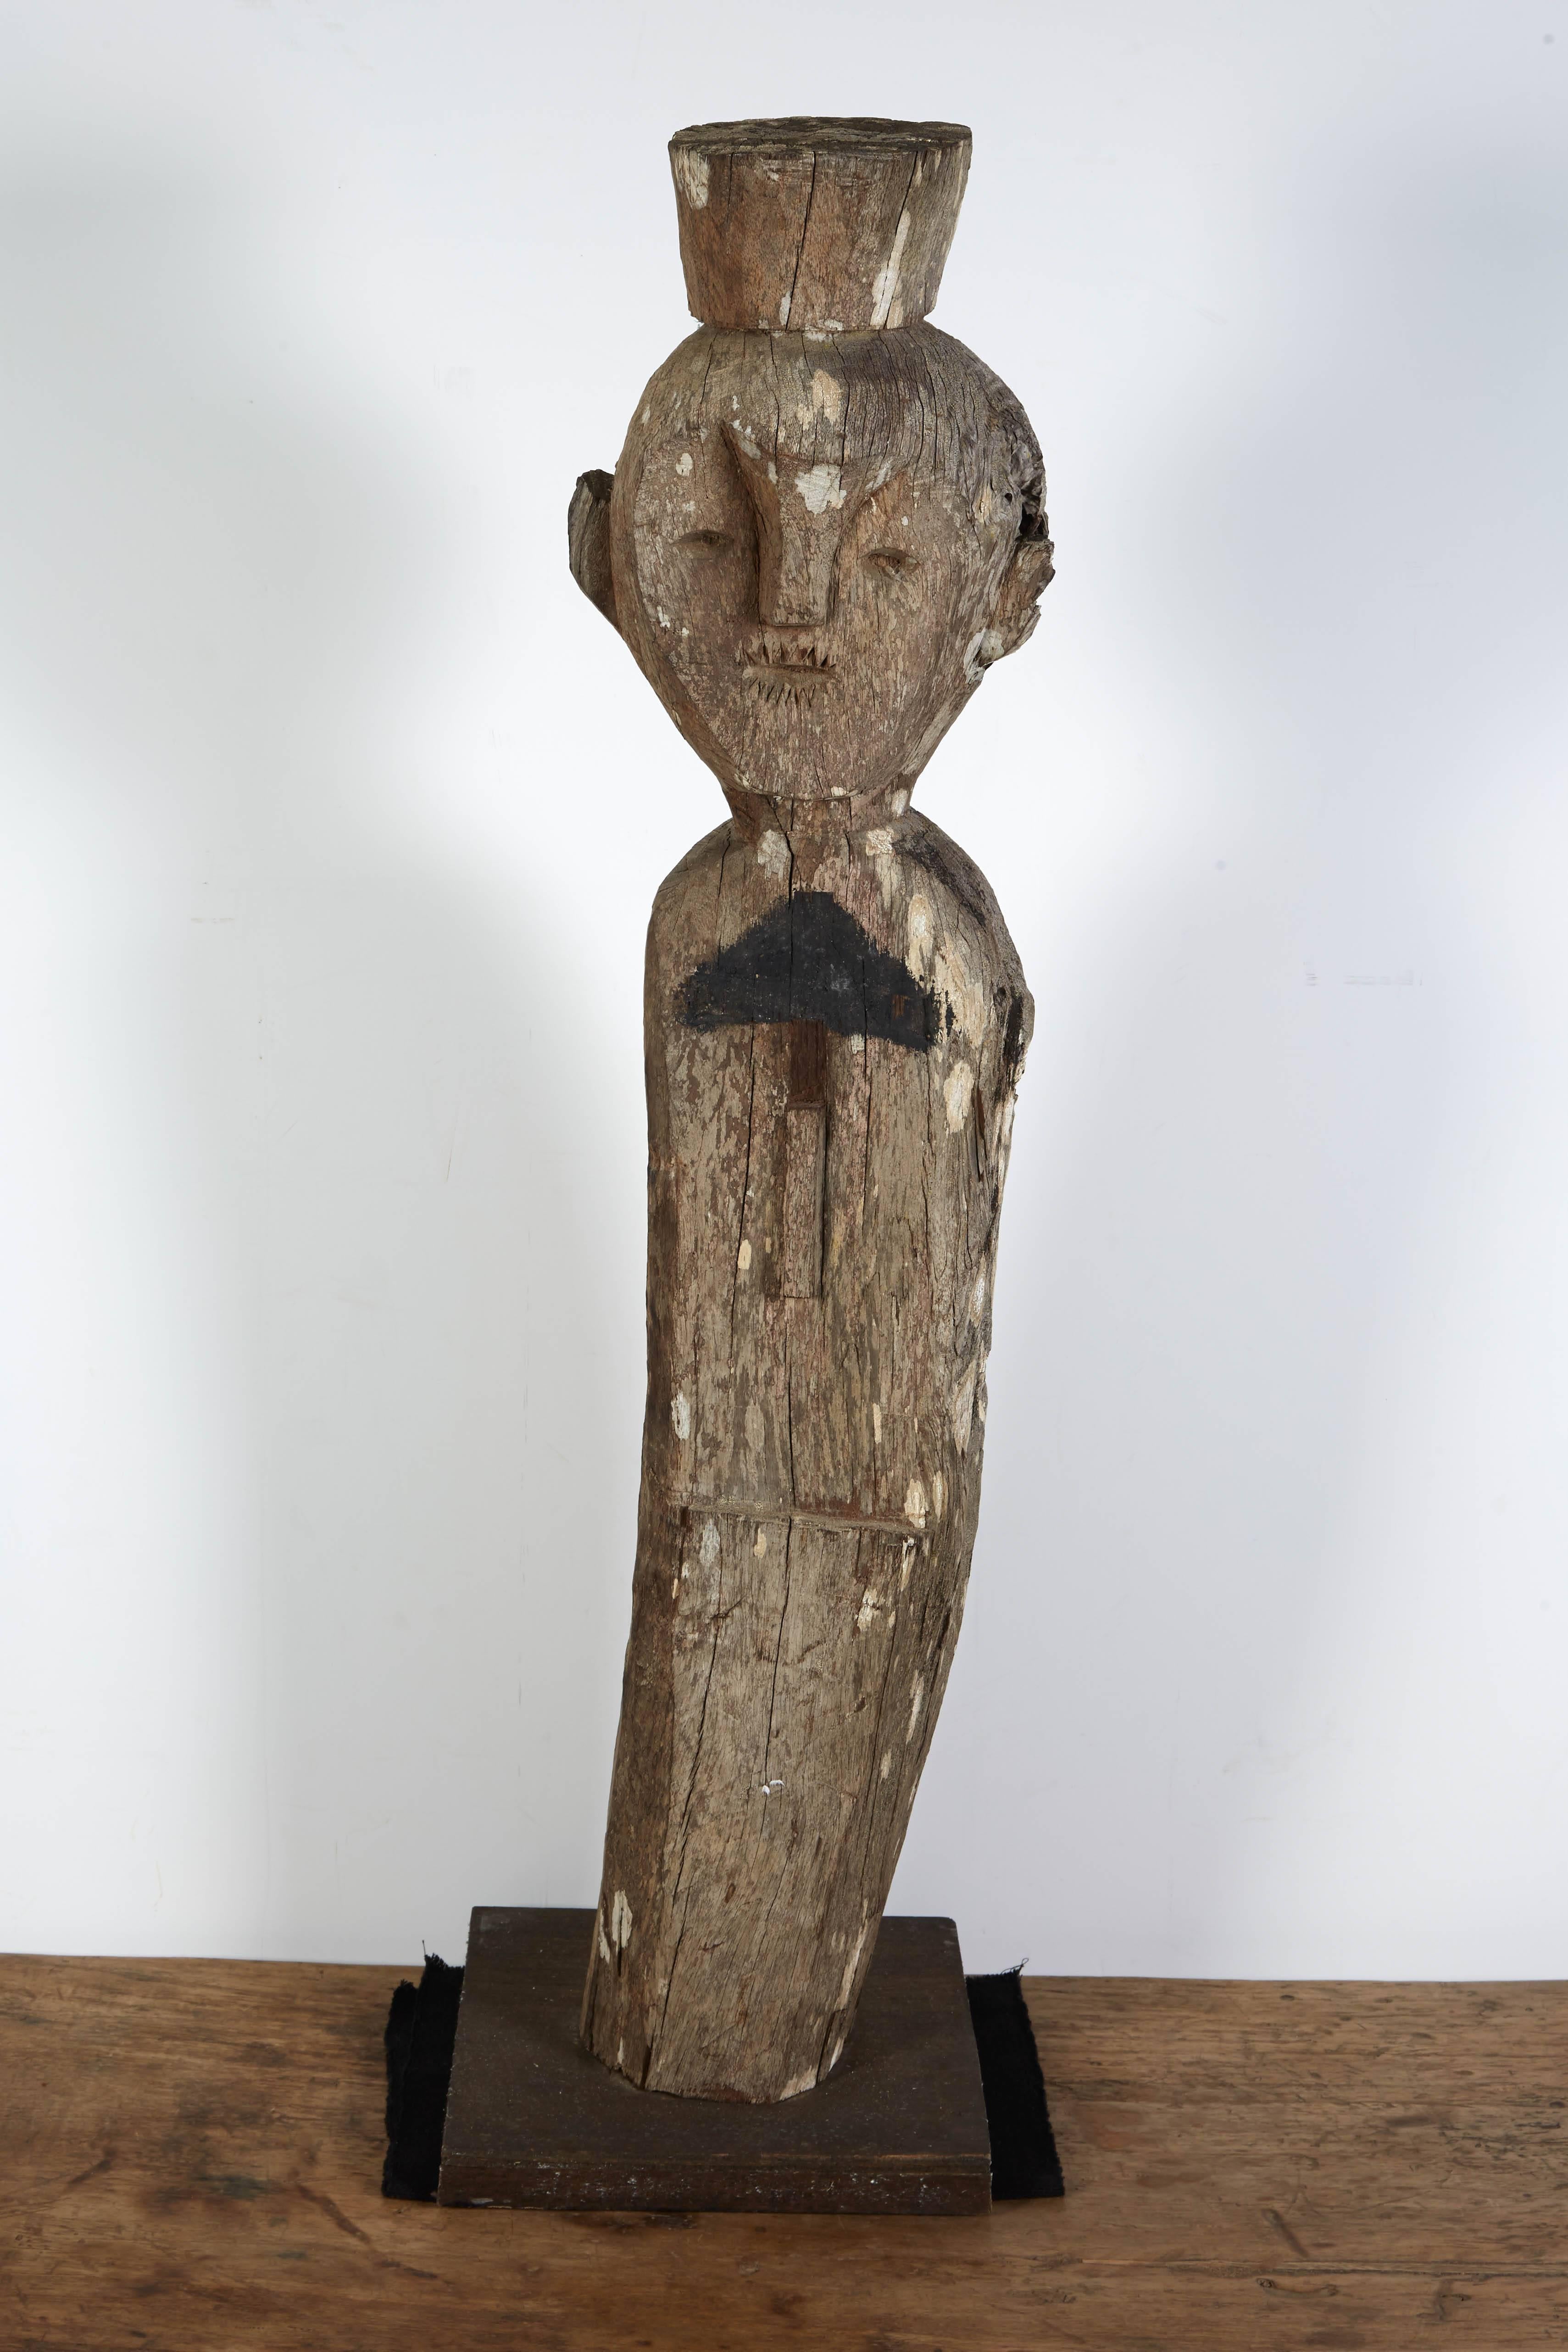 A tall, strikingly carved antique Malaysian guardian figure with traces of old paint and markings. Mounted on custom stand. Sarawak, Malaysia, circa 1900.

BH1014.